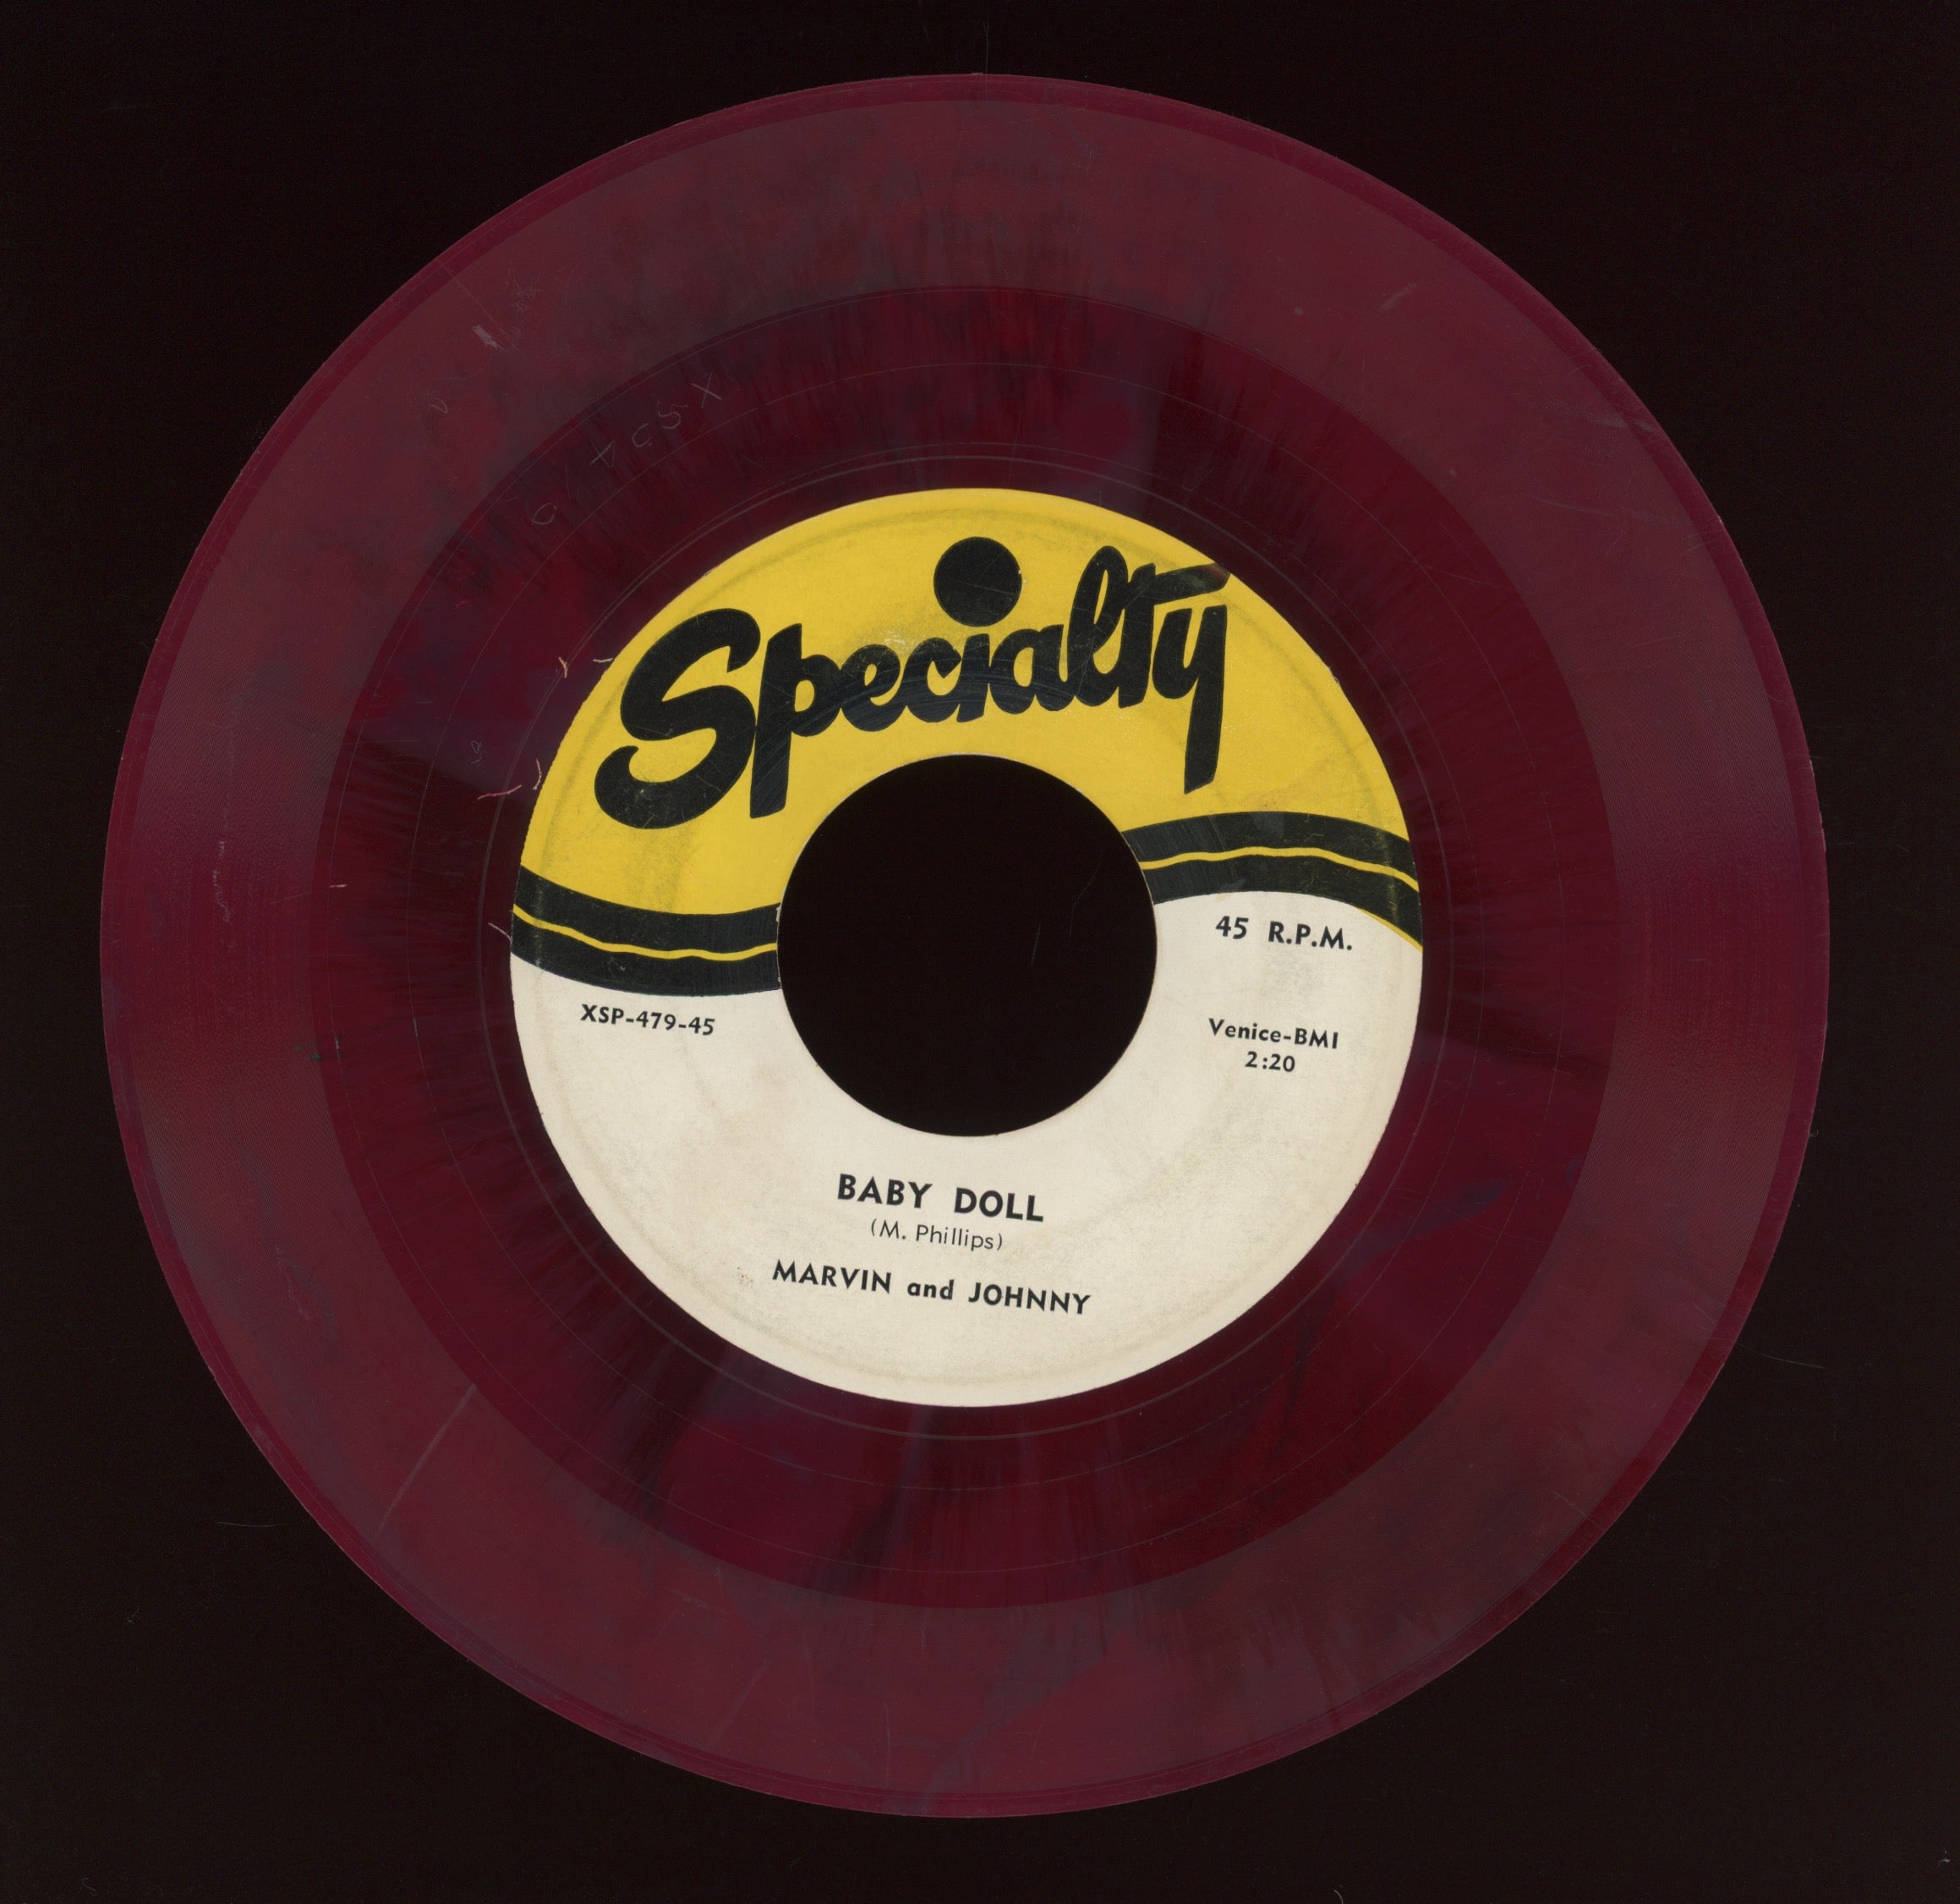 Marvin & Johnny - Baby Doll on Specialty Red Vinyl R&B 45